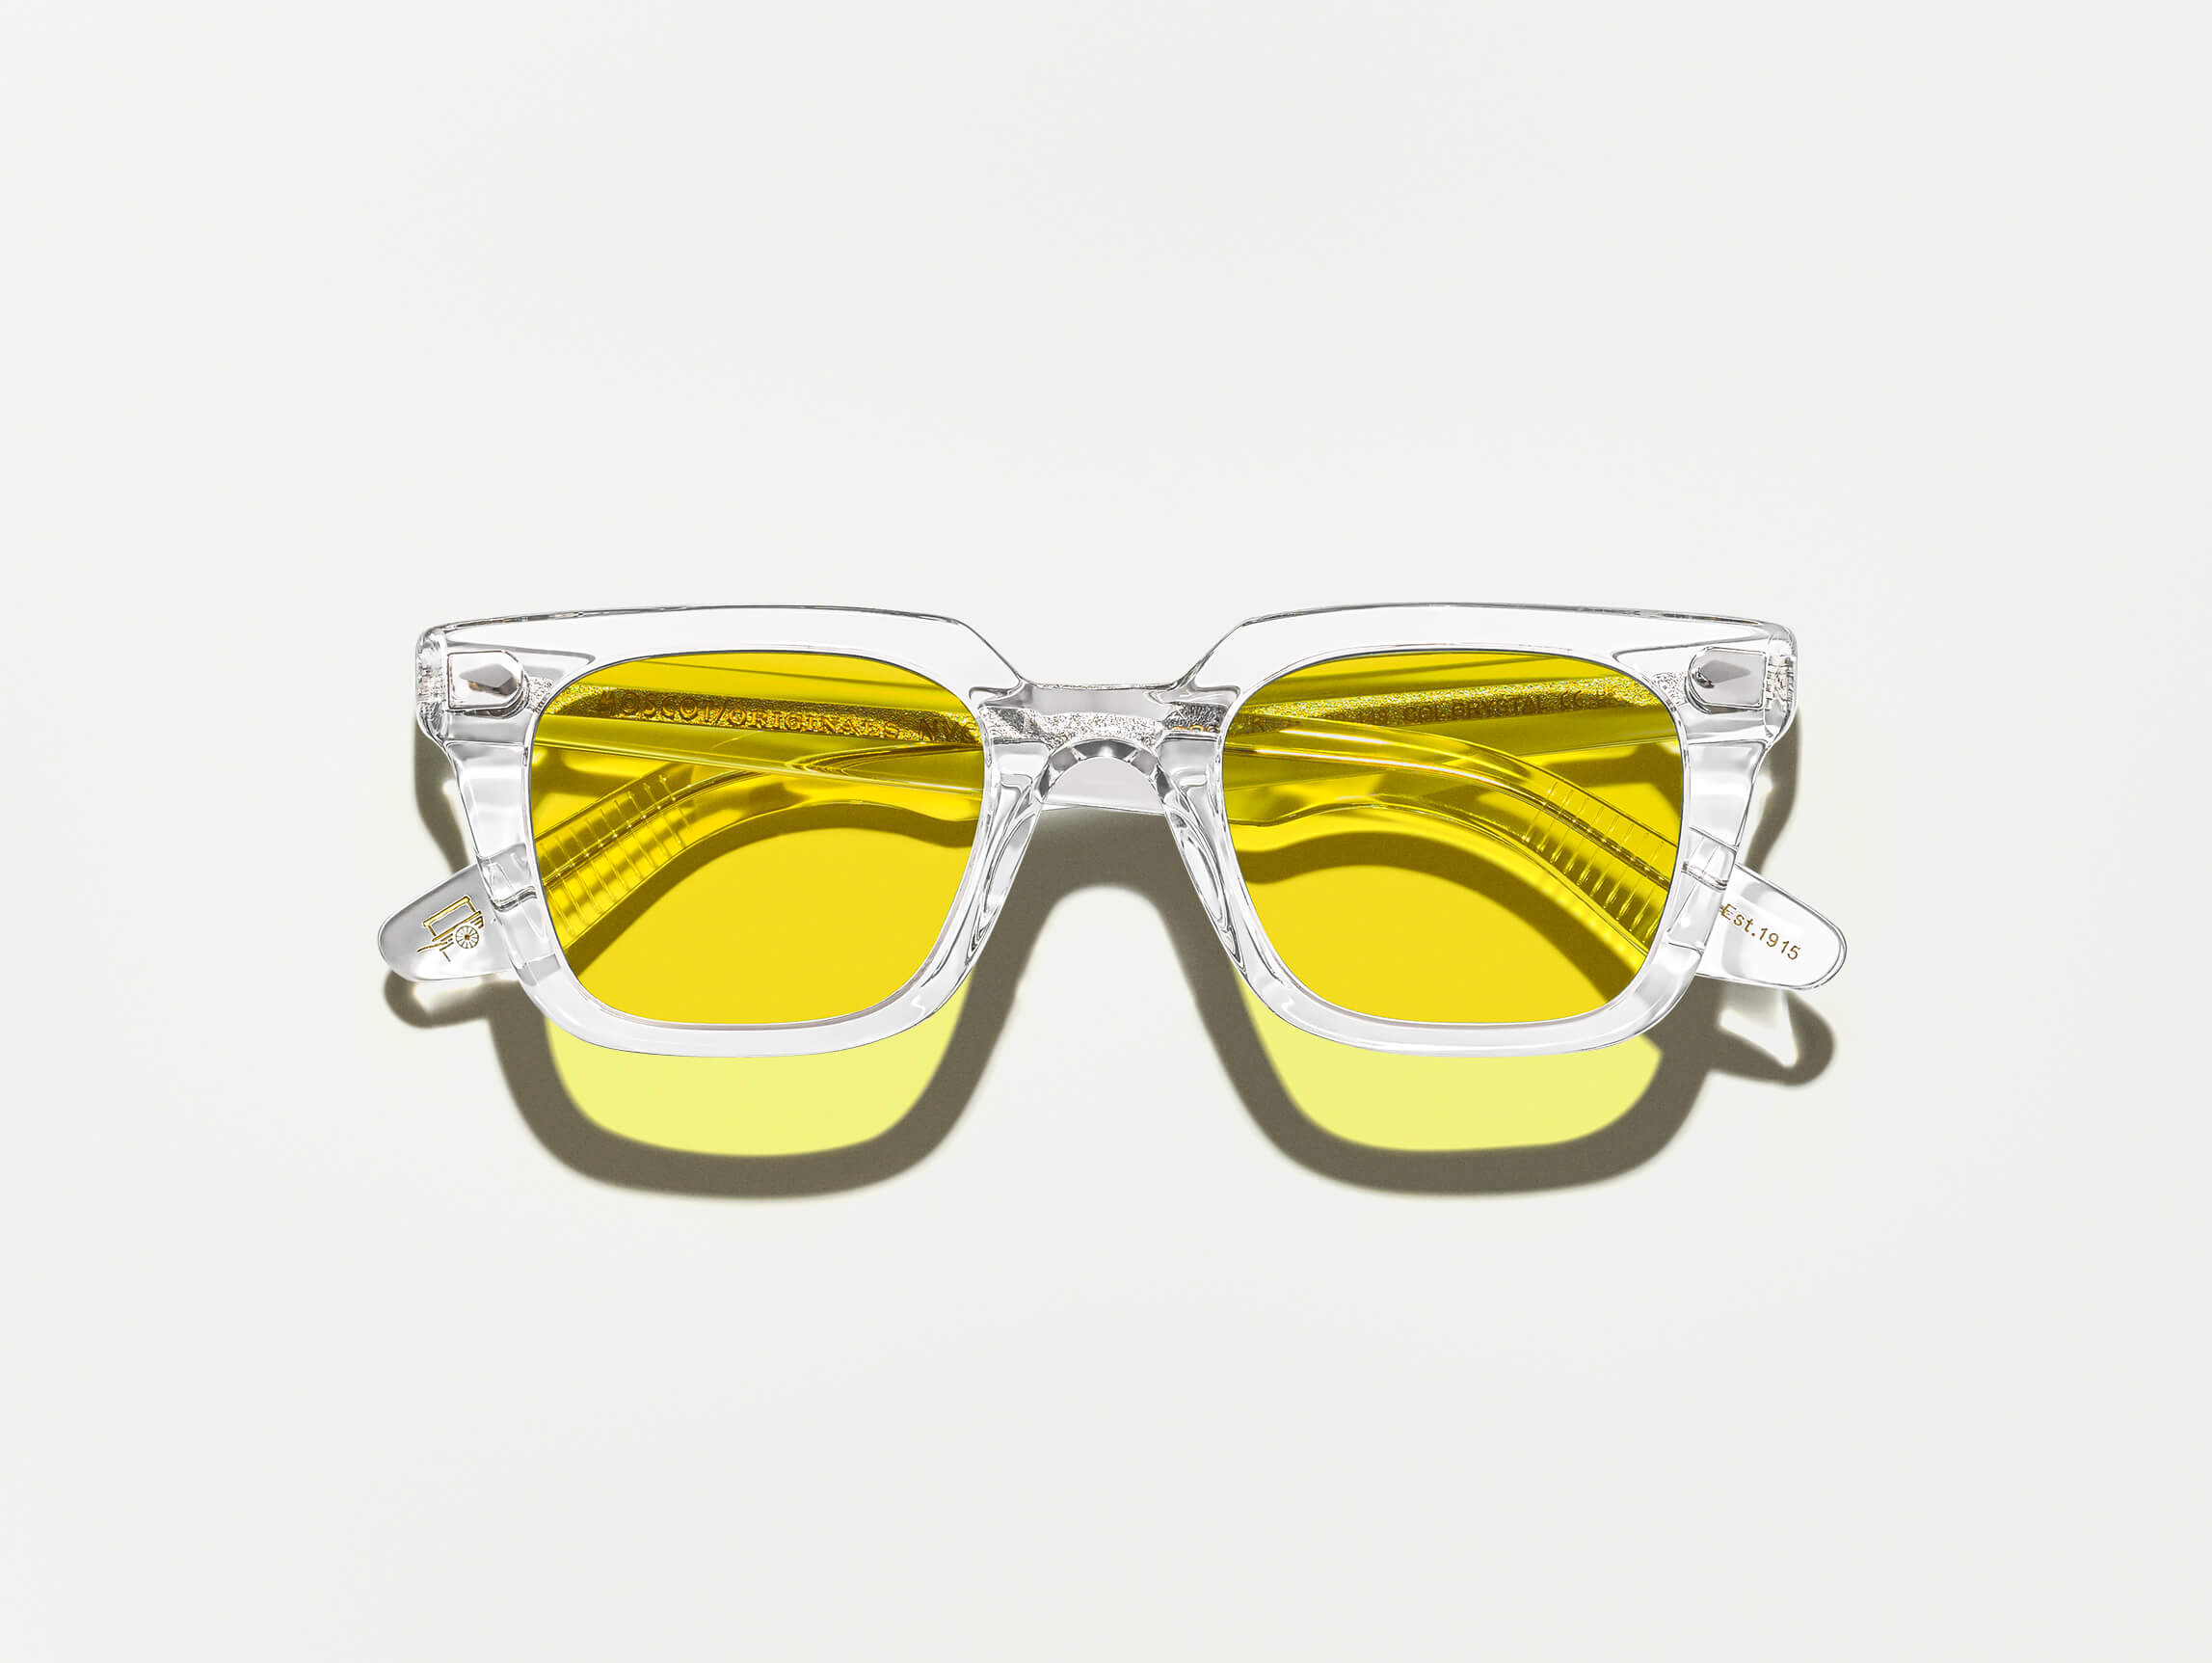 The GROBER Crystal with Mellow Yellow Tinted Lenses